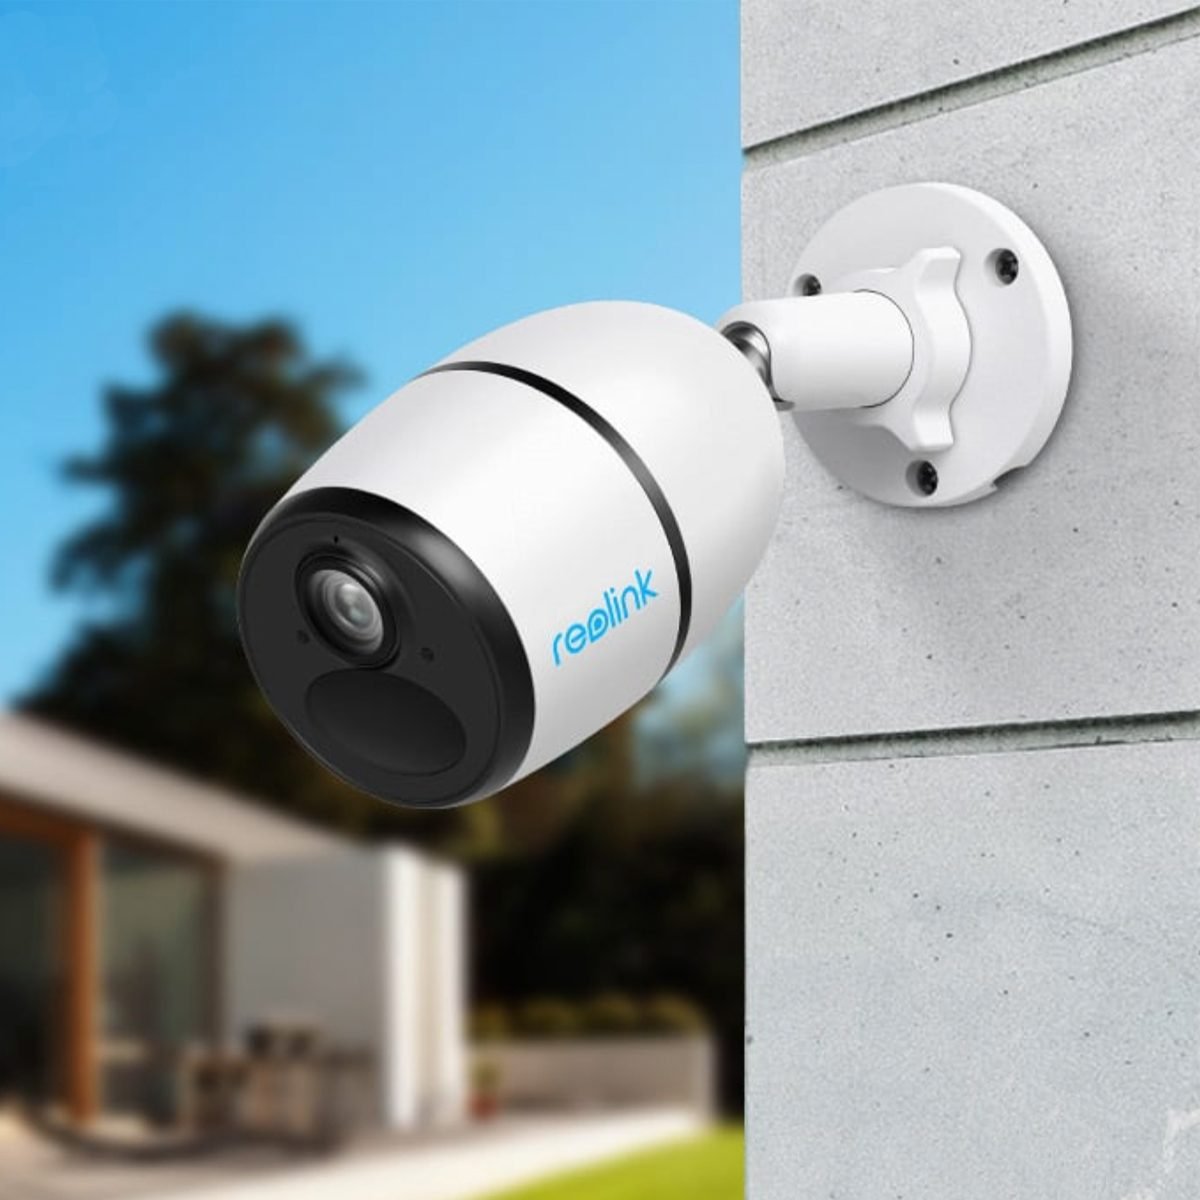 Can You Have Security Cameras Without Wi-Fi?